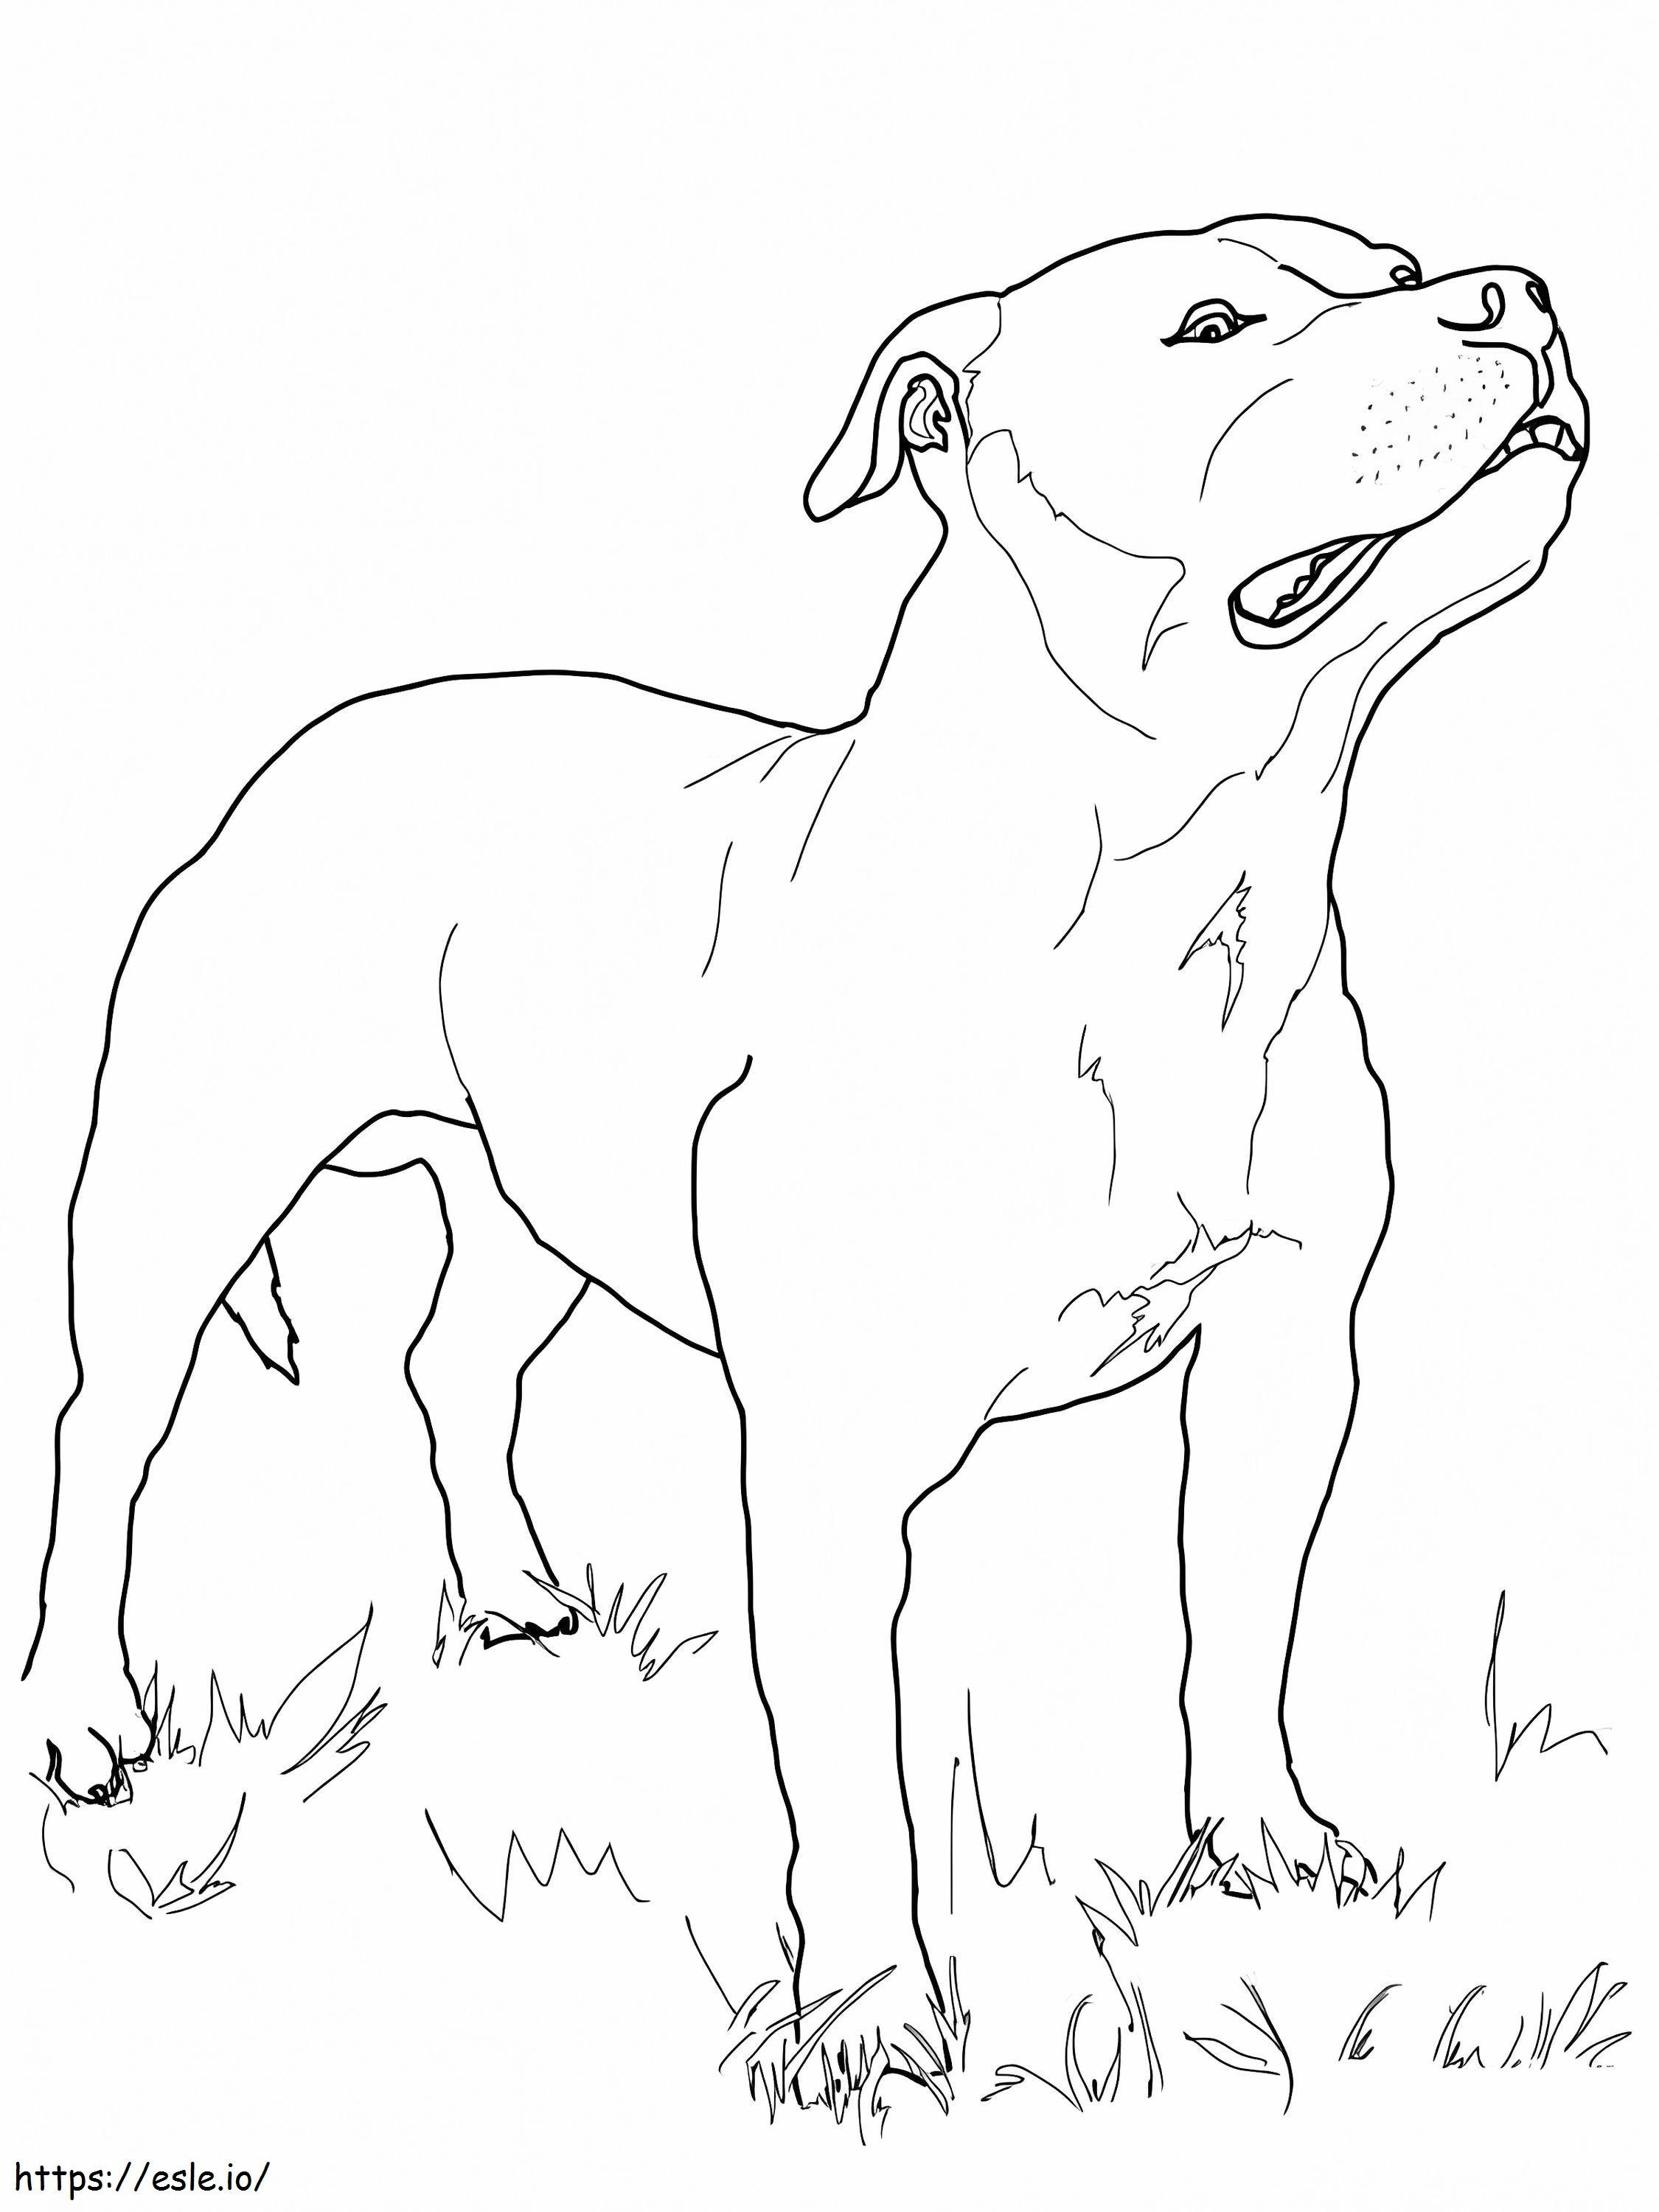 Pitbull On Grass coloring page